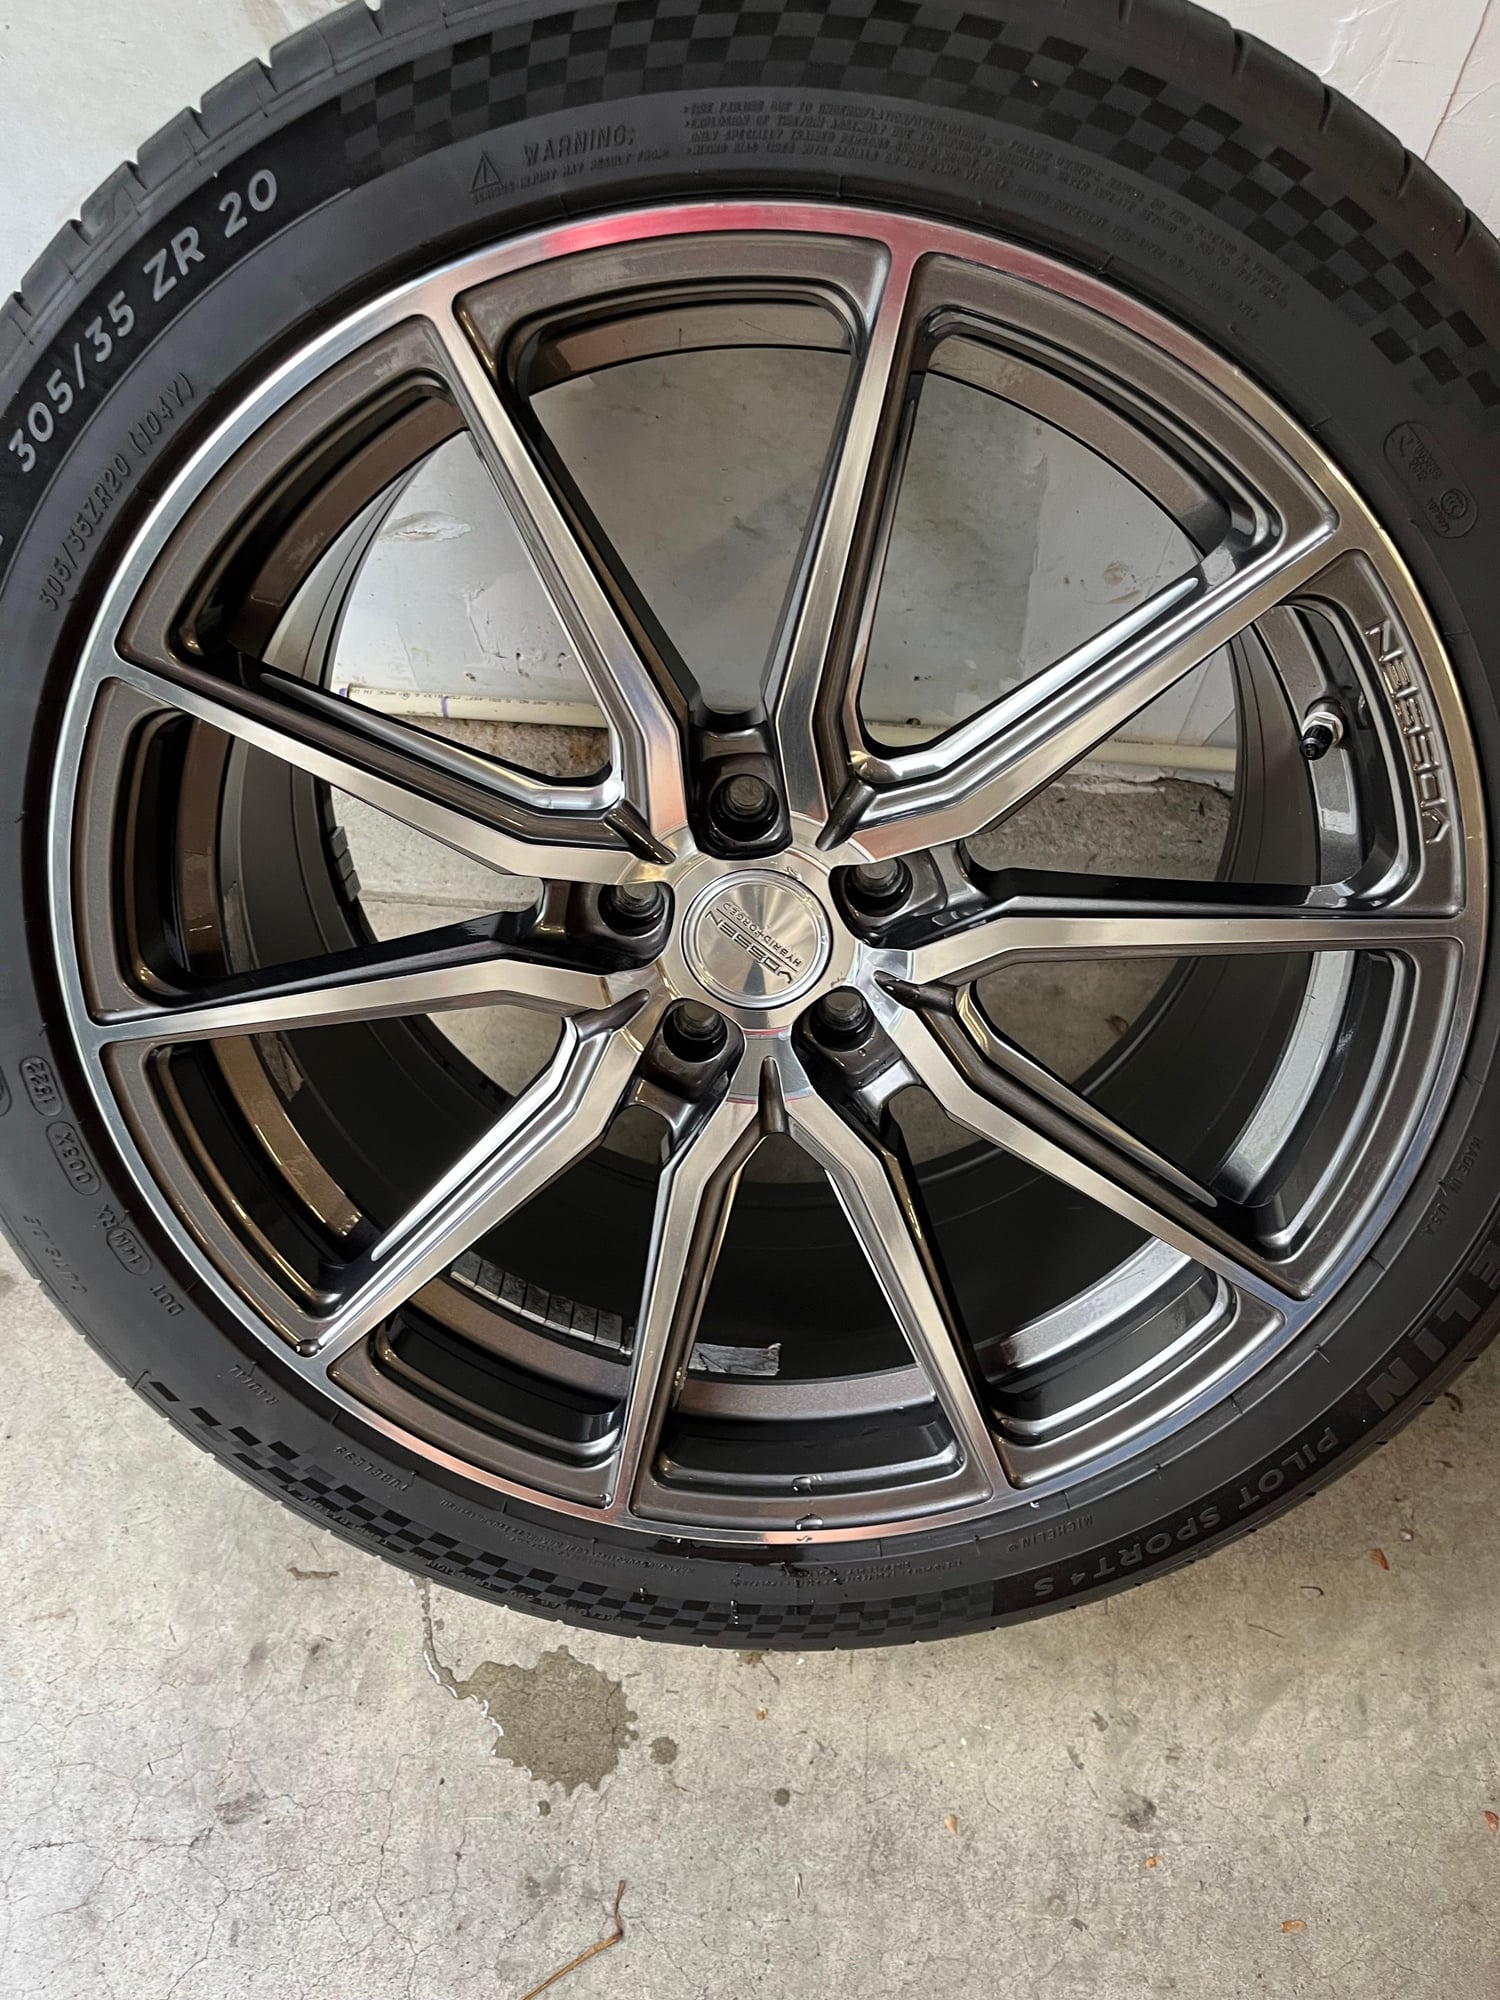 Wheels and Tires/Axles - Vossen HF-3 wheels and tires - Used - Sykesville, MD 21784, United States